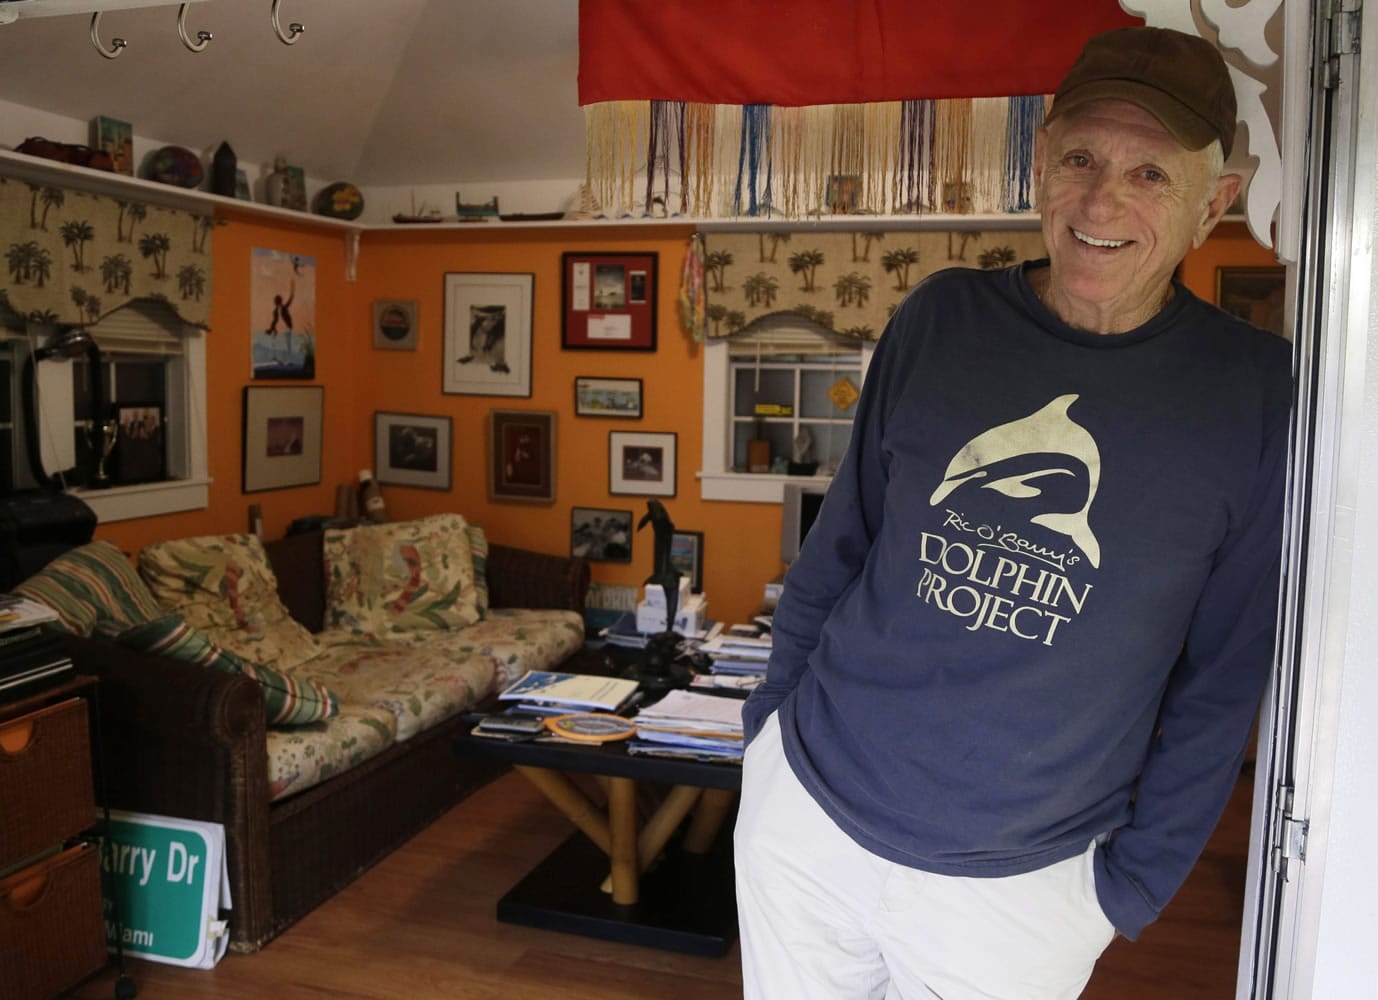 Ric O'Barry went from being a Dolphin trainer on the beloved &quot;Flipper&quot; TV series in the 1960s to a notorious activist featured in the 2009 documentary &quot;The Cove,&quot; which shows the killing of dolphins in Japan.